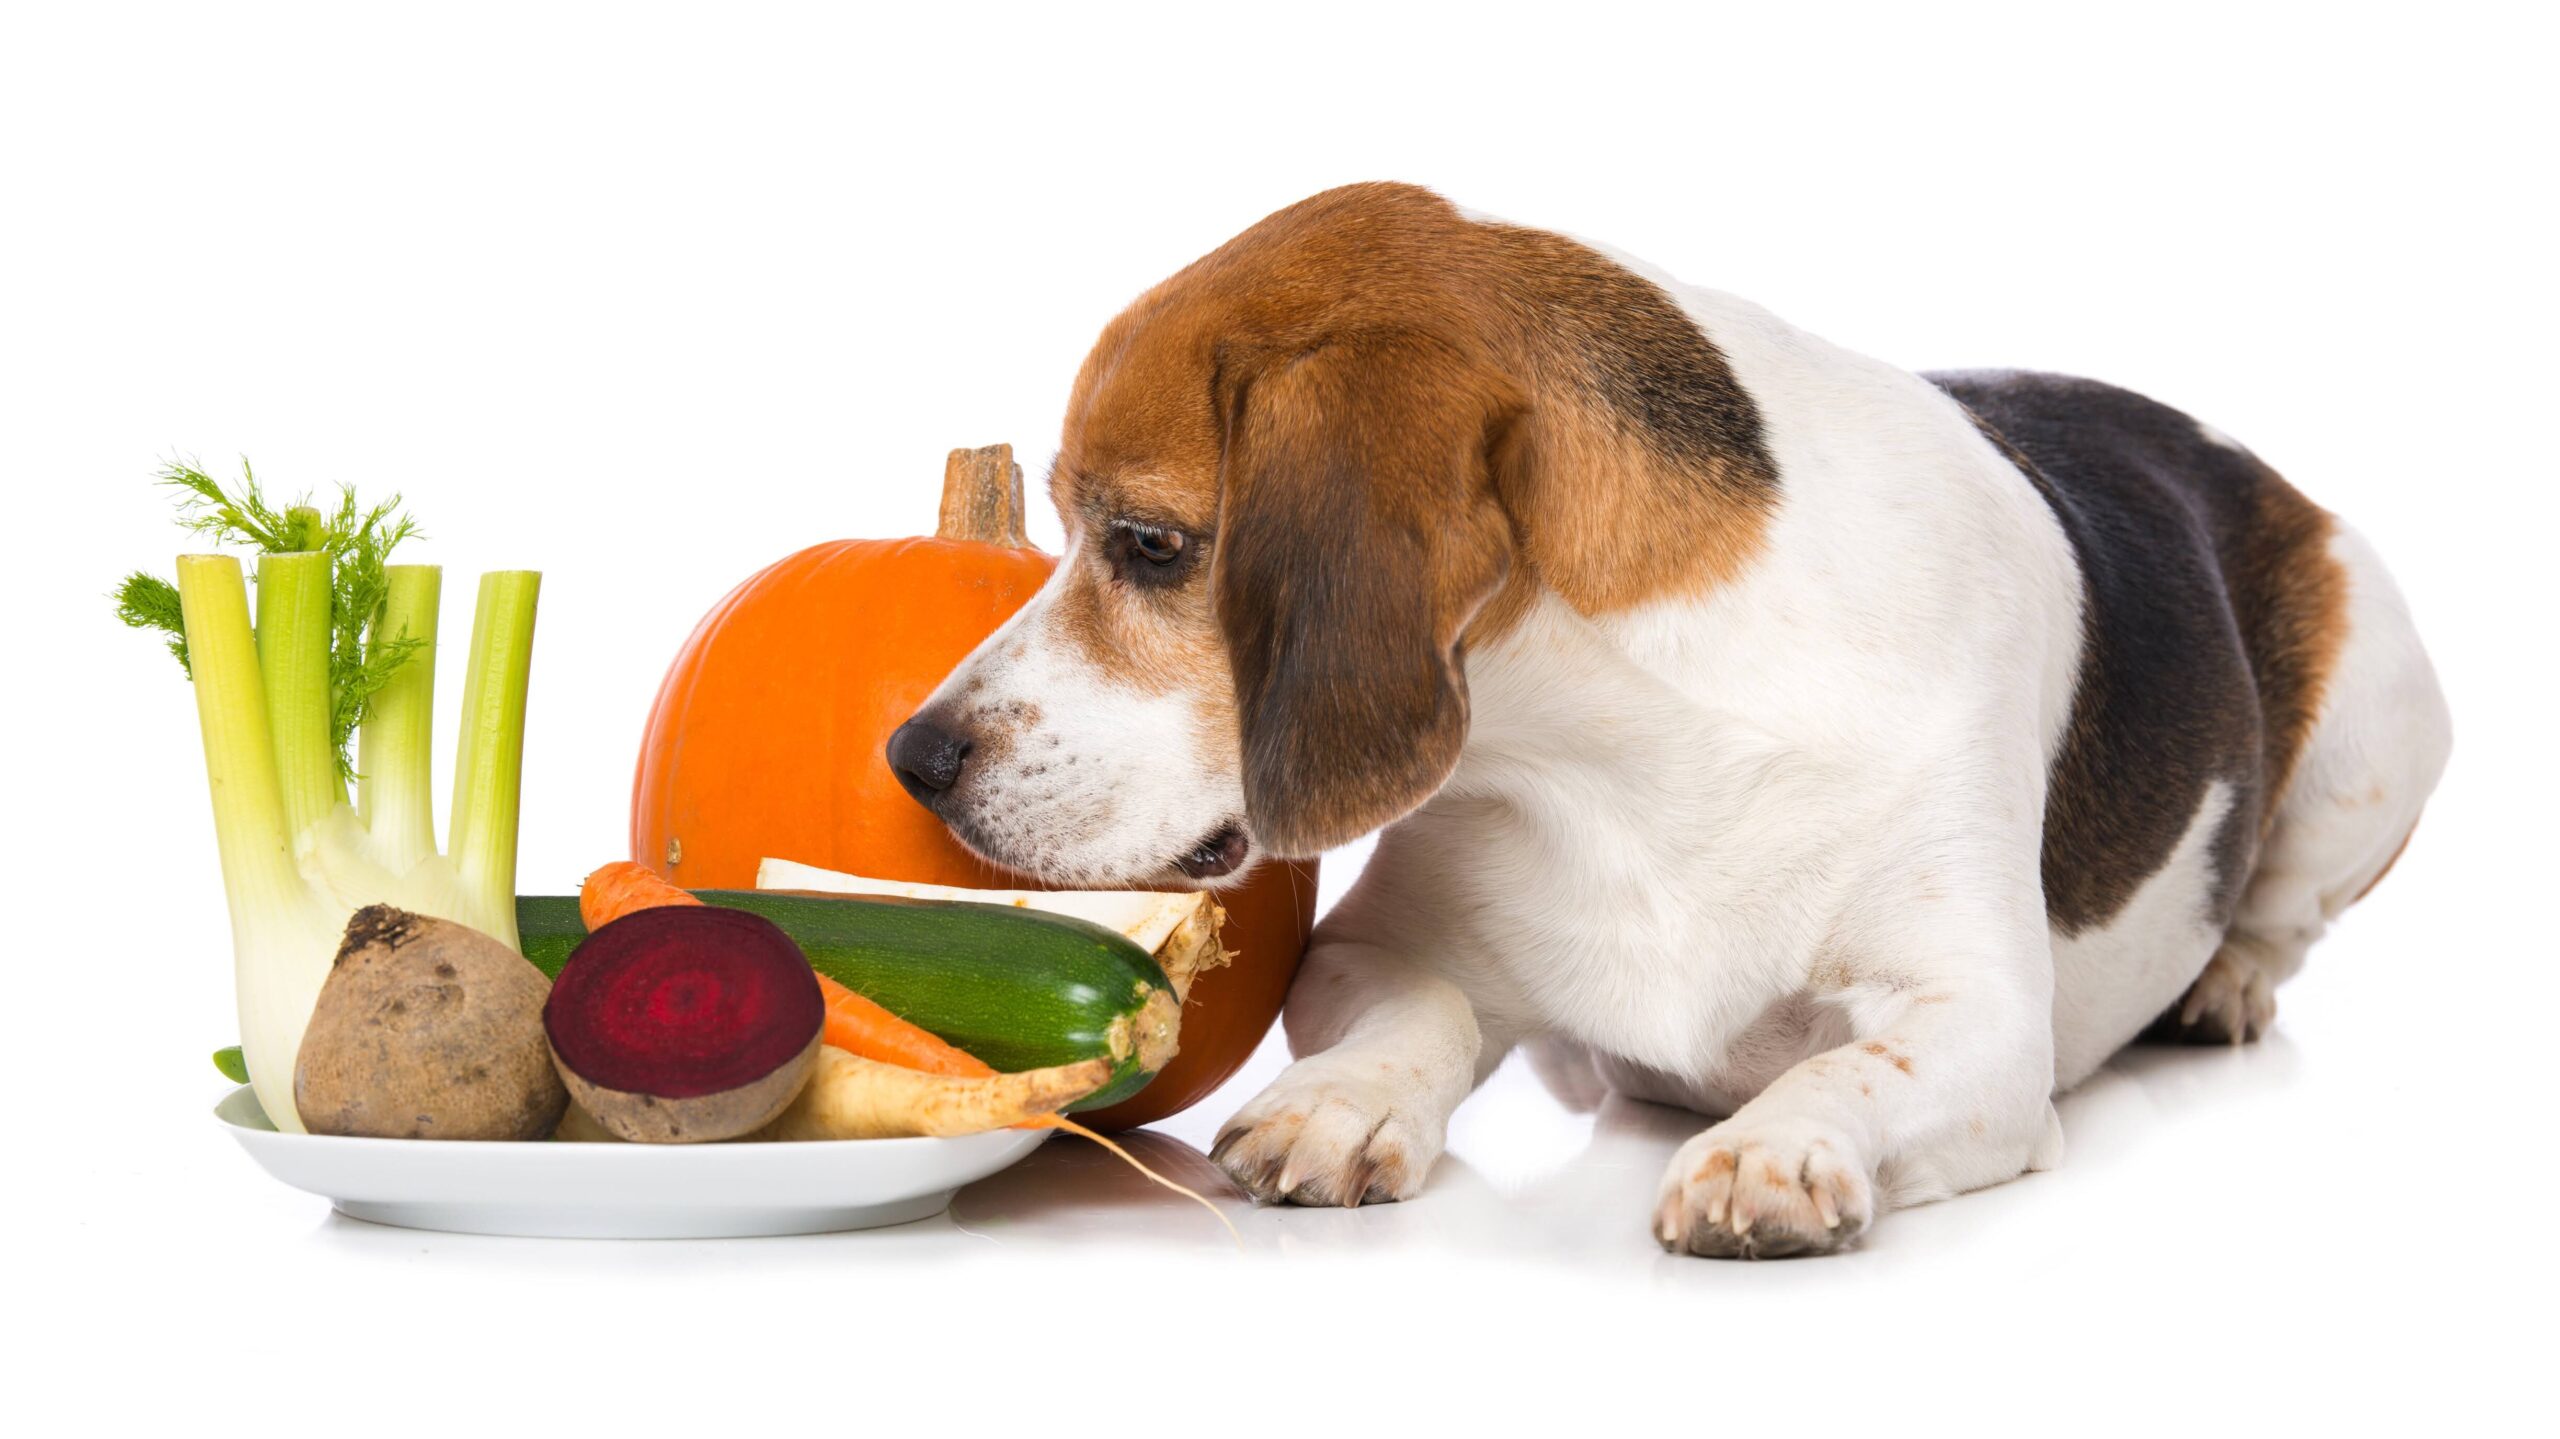 Beagle dog with vegetables isolated on white background